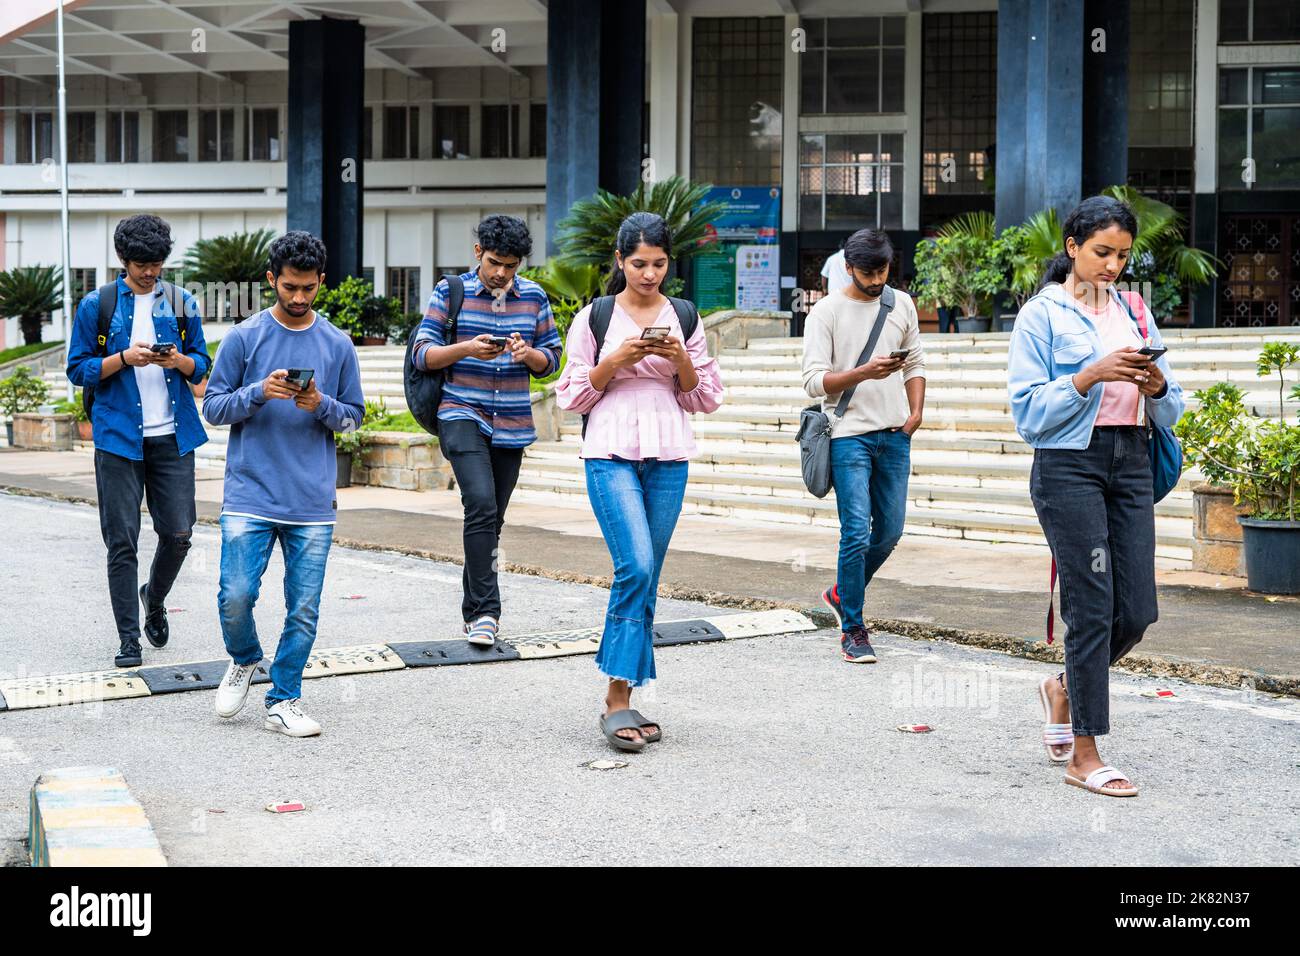 group of students busy checking result or using on mobile phone at college campus - concept of social media, smartphone addiction and technology. Stock Photo